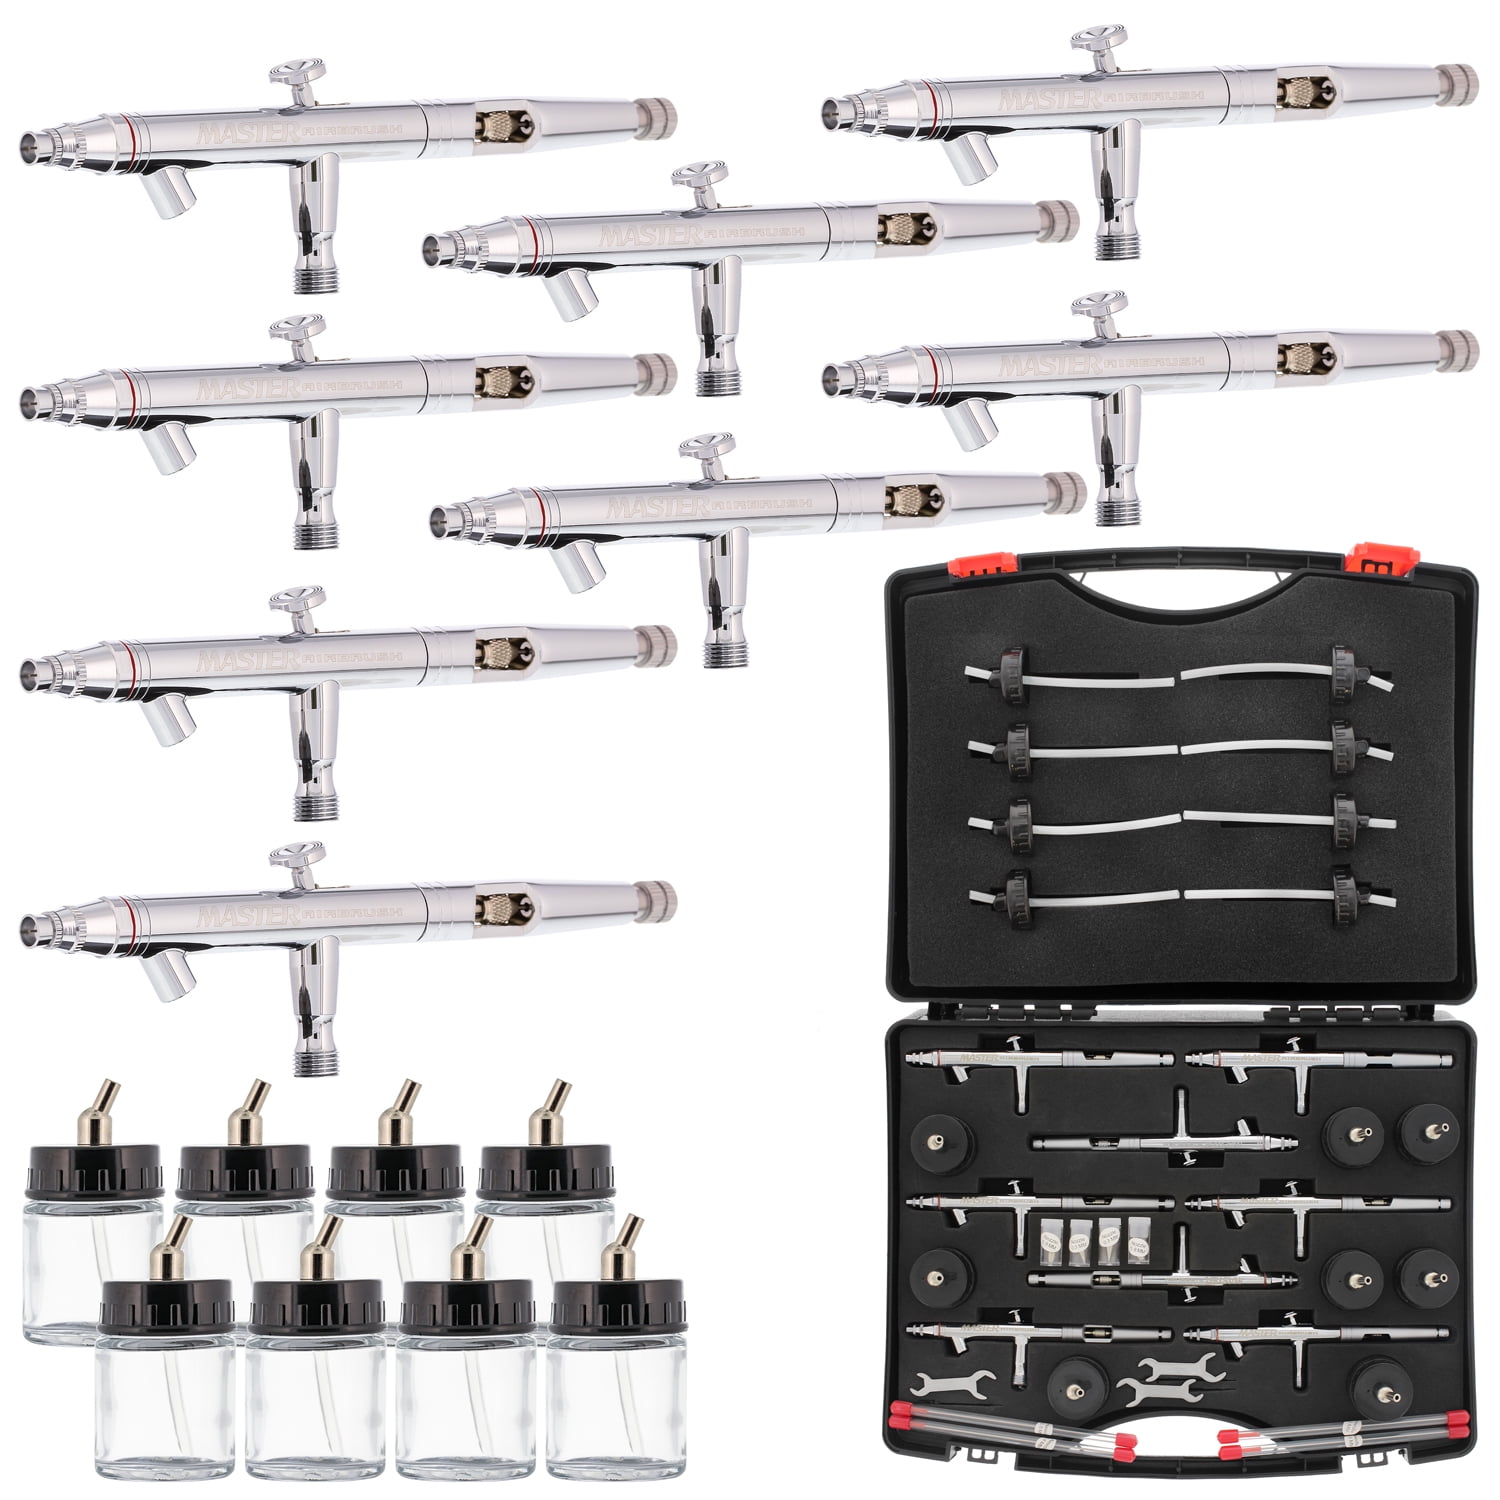 Badger Crescendo 175 Double Action Airbrush - Special Edition Set, 175-16 